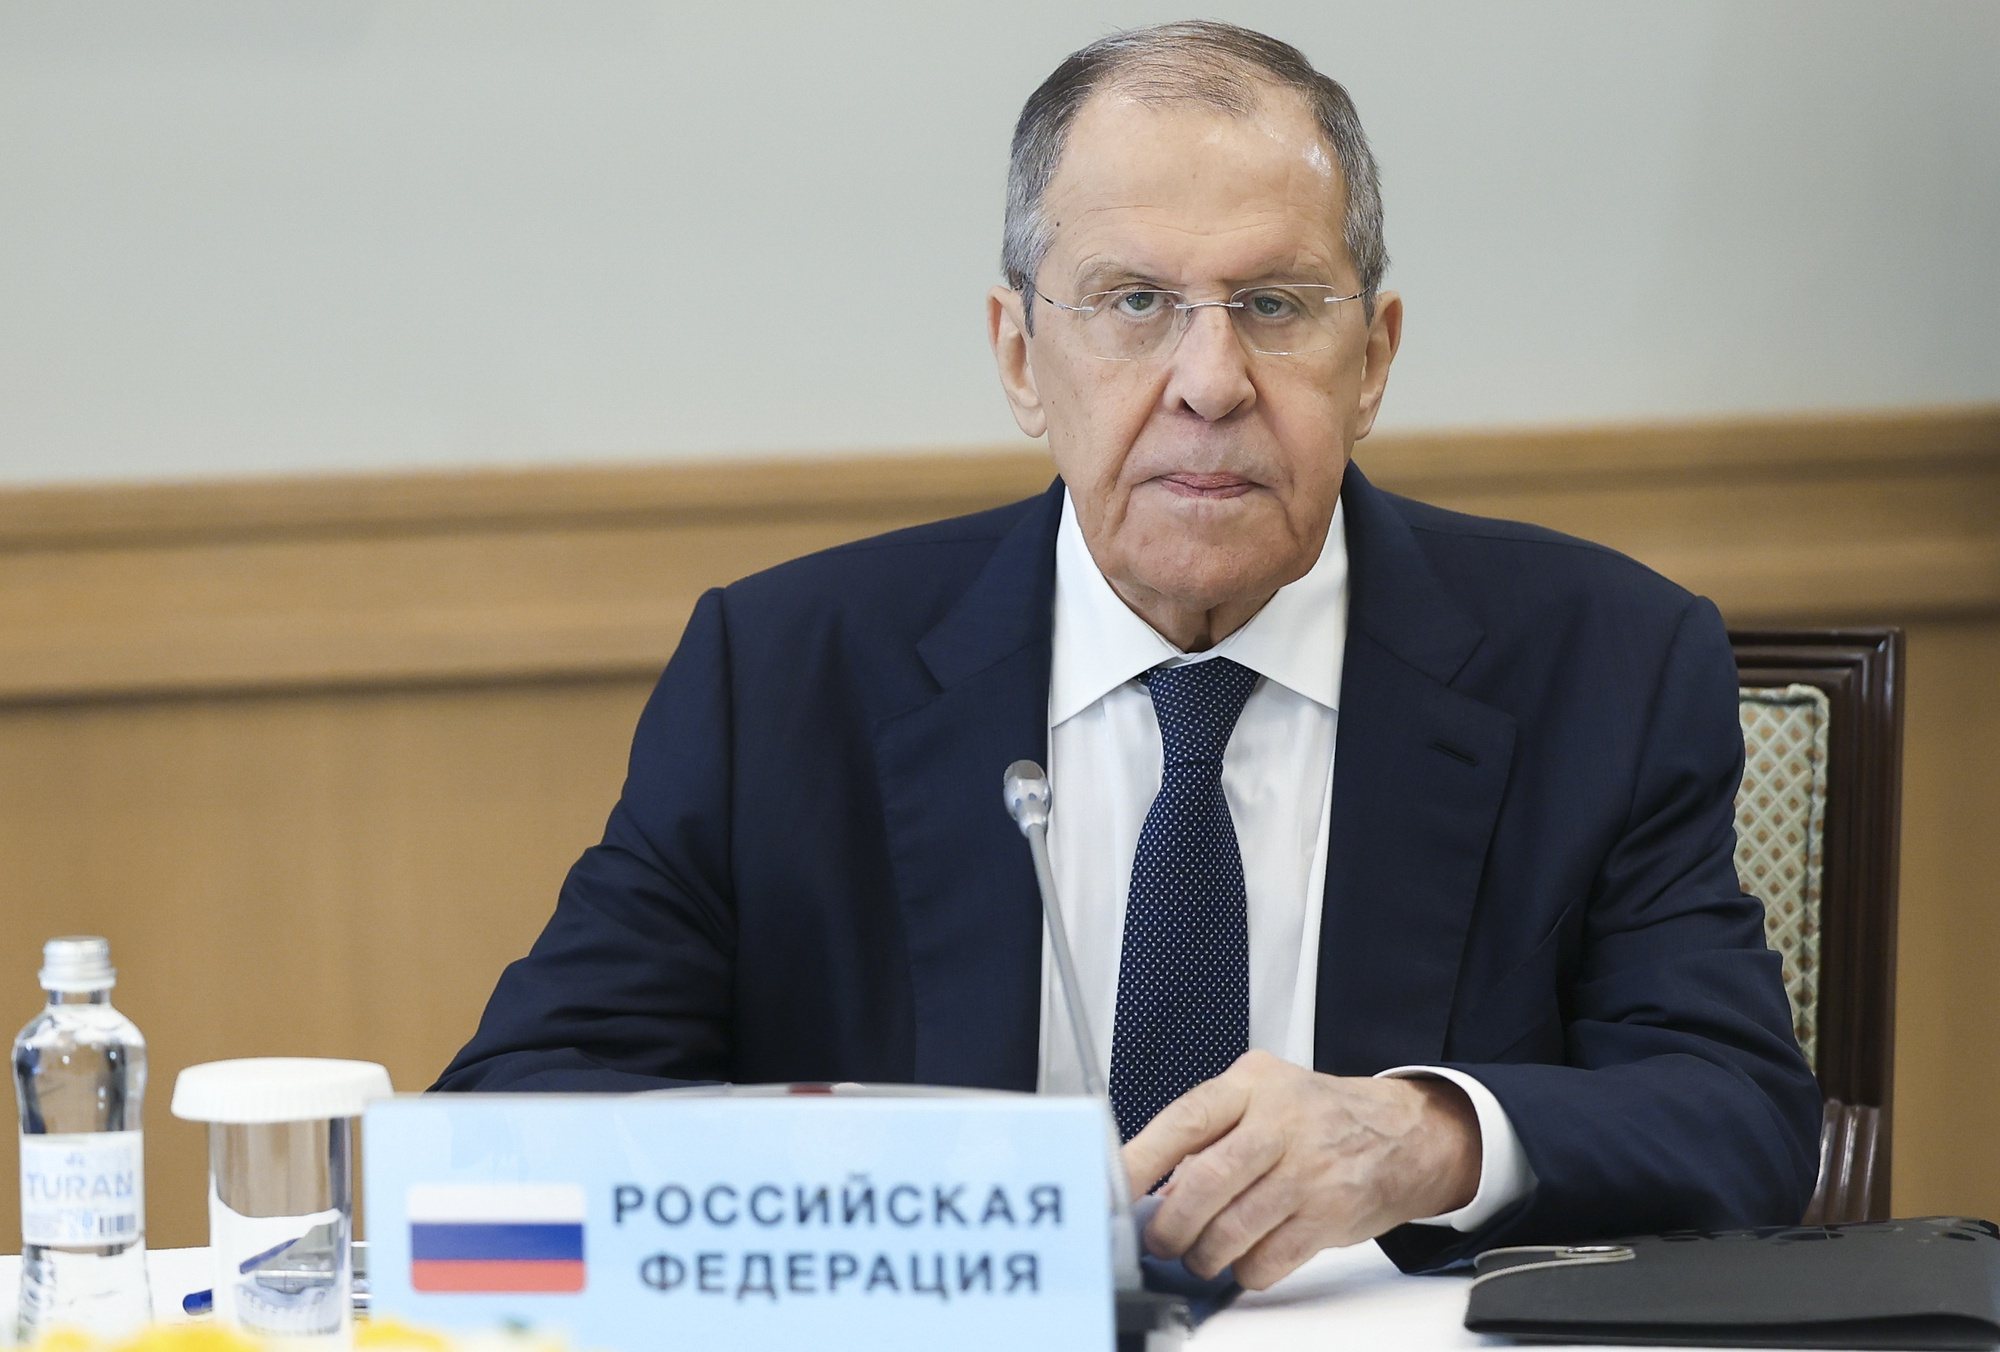 epa11427371 A handout photo made available by the Russian Foreign Ministry press service shows Russian Foreign Minister Sergey Lavrov during a meeting of the CSTO Foreign Ministers Council in Almaty, Kazakhstan, 21 June 2024. The Collective Security Treaty Organization (CSTO) includes Armenia, Belarus, Kazakhstan, Kyrgyzstan, Russia and Tajikistan.  EPA/RUSSIAN FOREIGN MINISTRY PRESS SERVICE/HANDOUT  HANDOUT EDITORIAL USE ONLY/NO SALES HANDOUT EDITORIAL USE ONLY/NO SALES